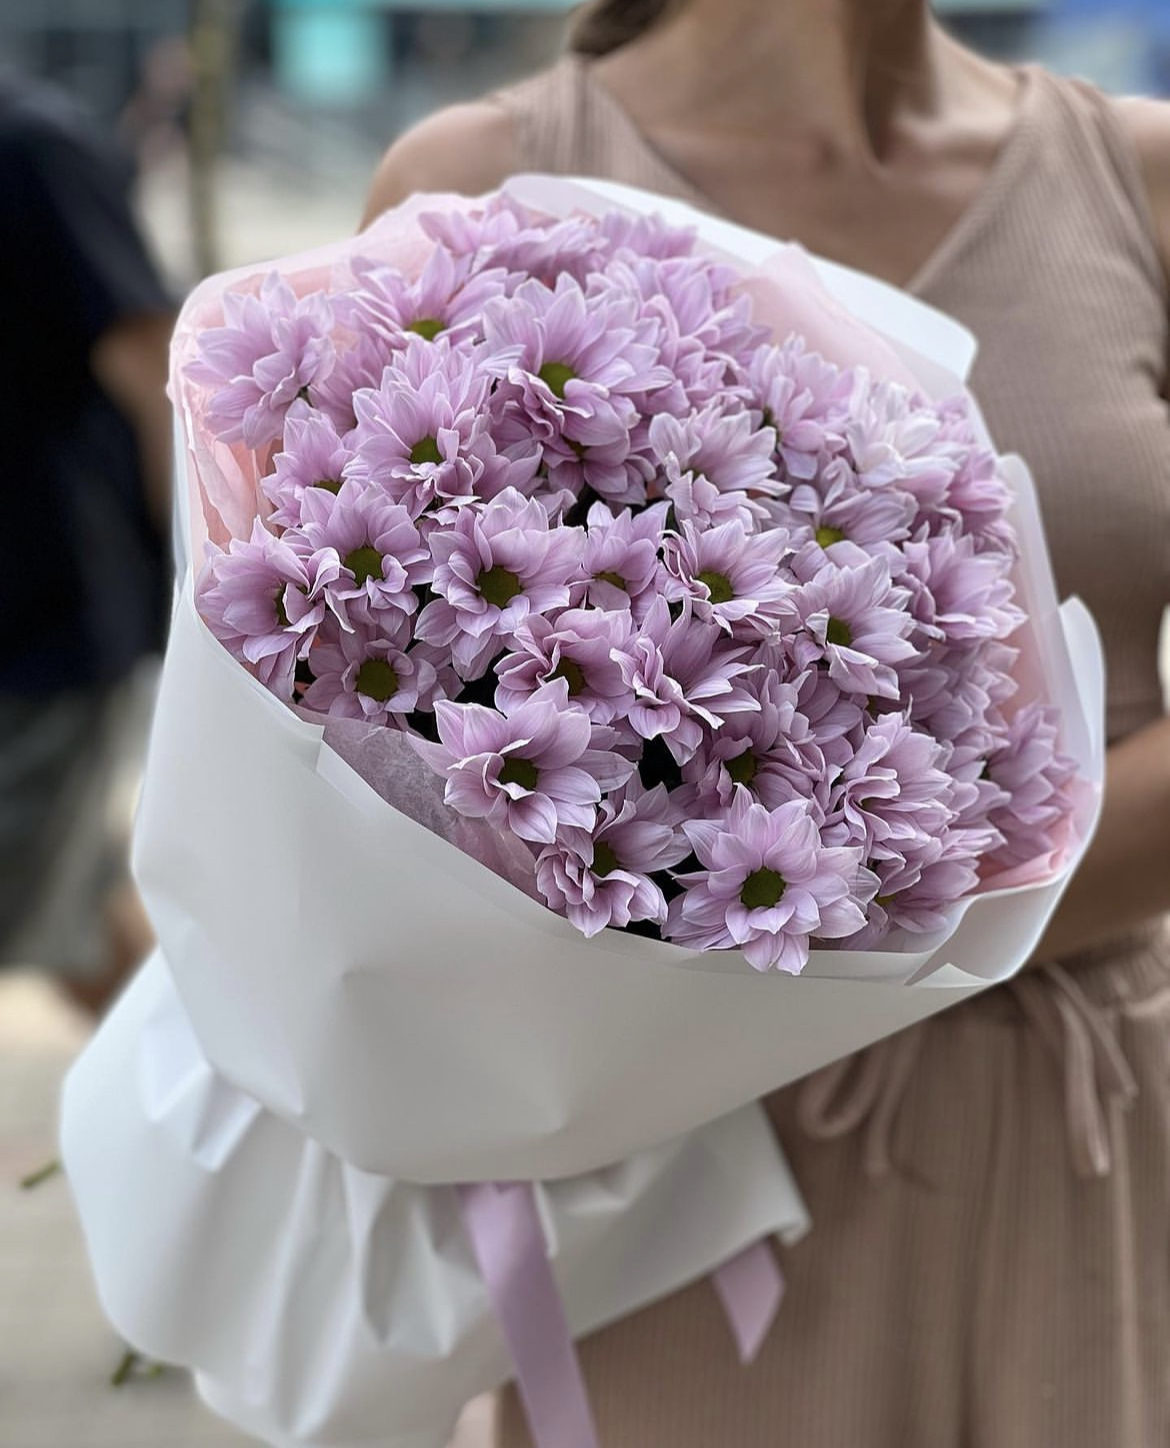 Inexpensive bouquet of chrysanthemums